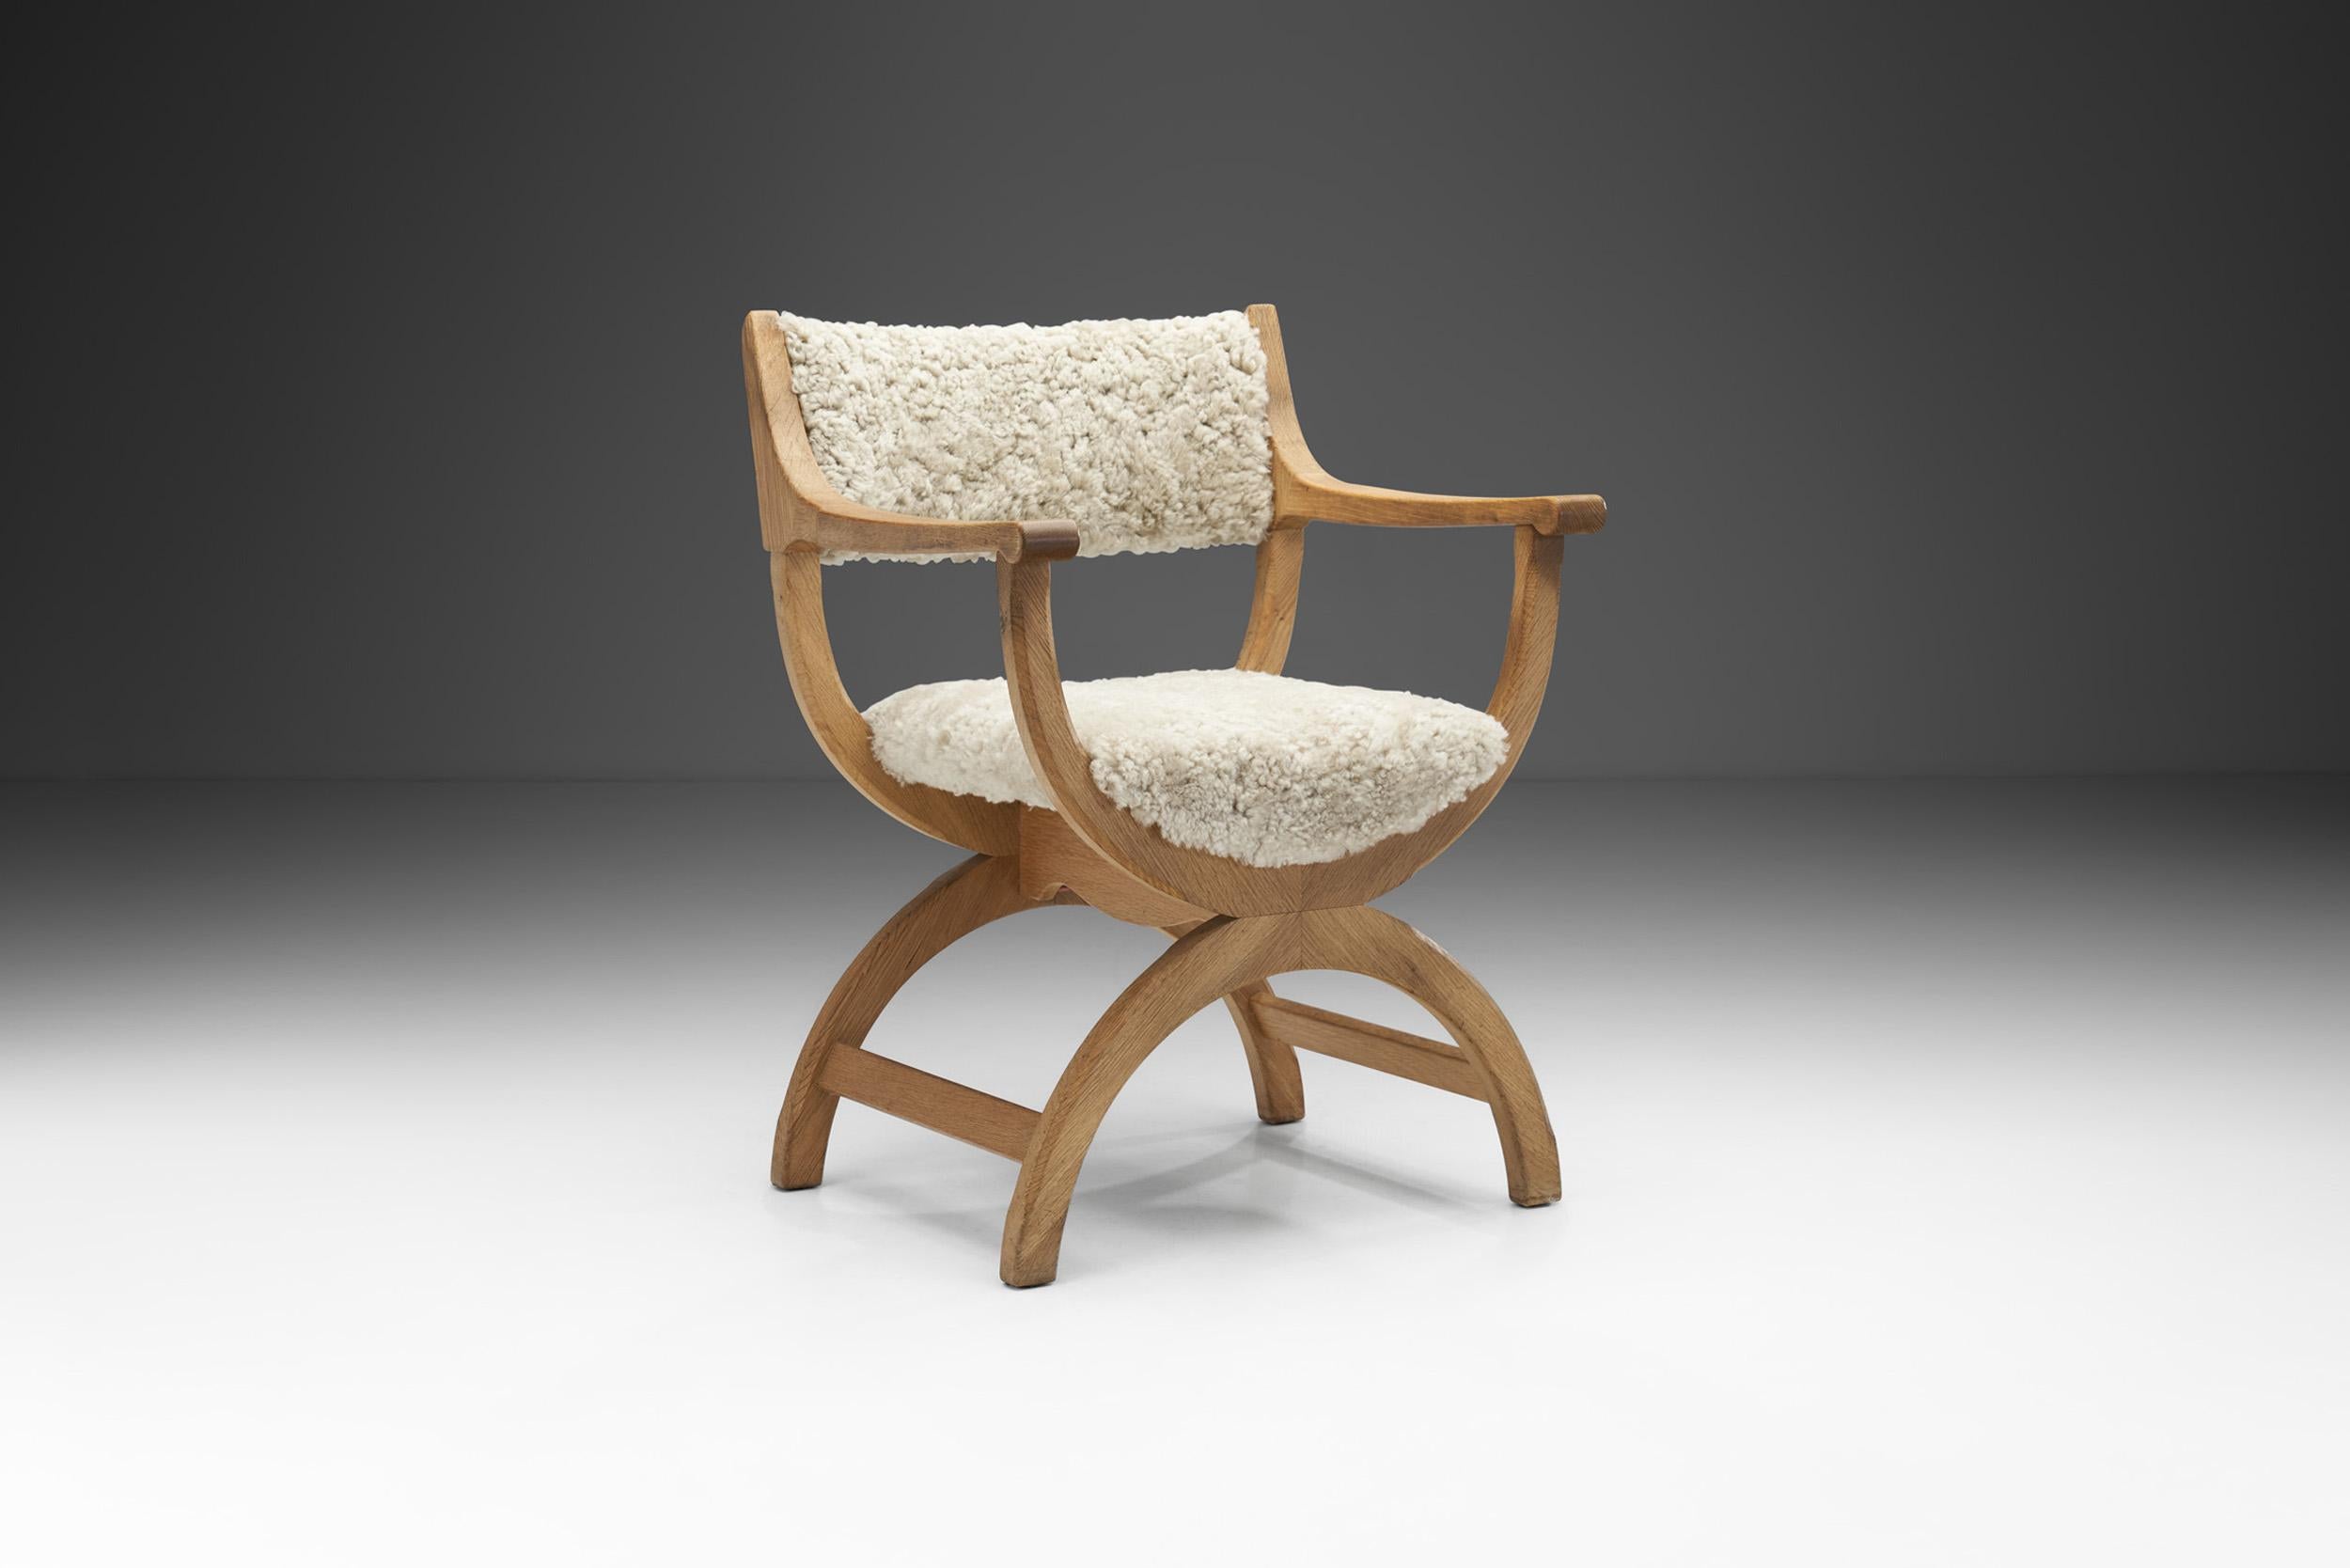 Designed by Henning Kjaernulf, this so-called “kurulstol” or kurul chair, is an iconic model by Danish designer, Henning Kjærnulf. The Kurul chair is an ancient folding chair, originally a folding stool with straight or curved legs. Among the